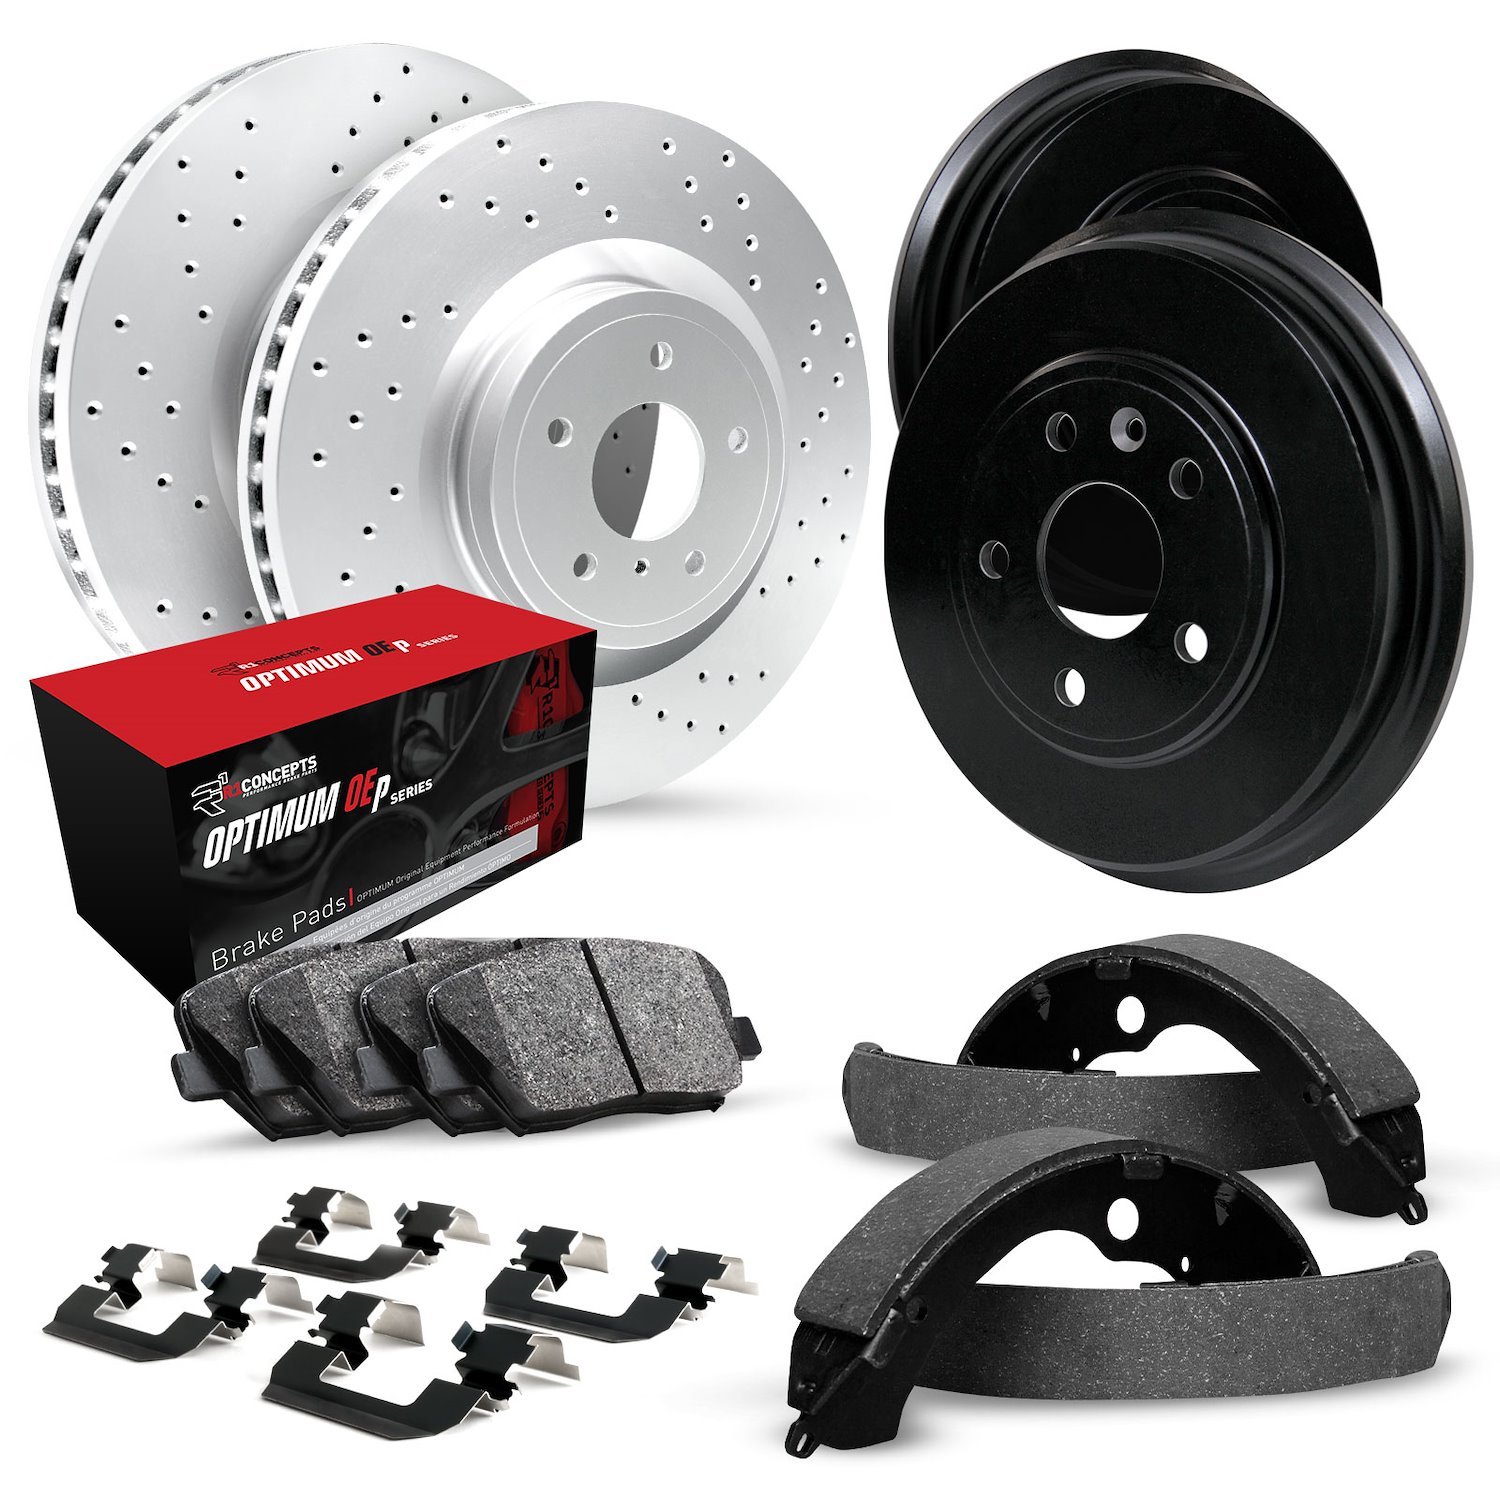 GEO-Carbon Drilled Brake Rotor & Drum Set w/Optimum OE Pads, Shoes, & Hardware, 1975-1978 GM, Position: Front & Rear